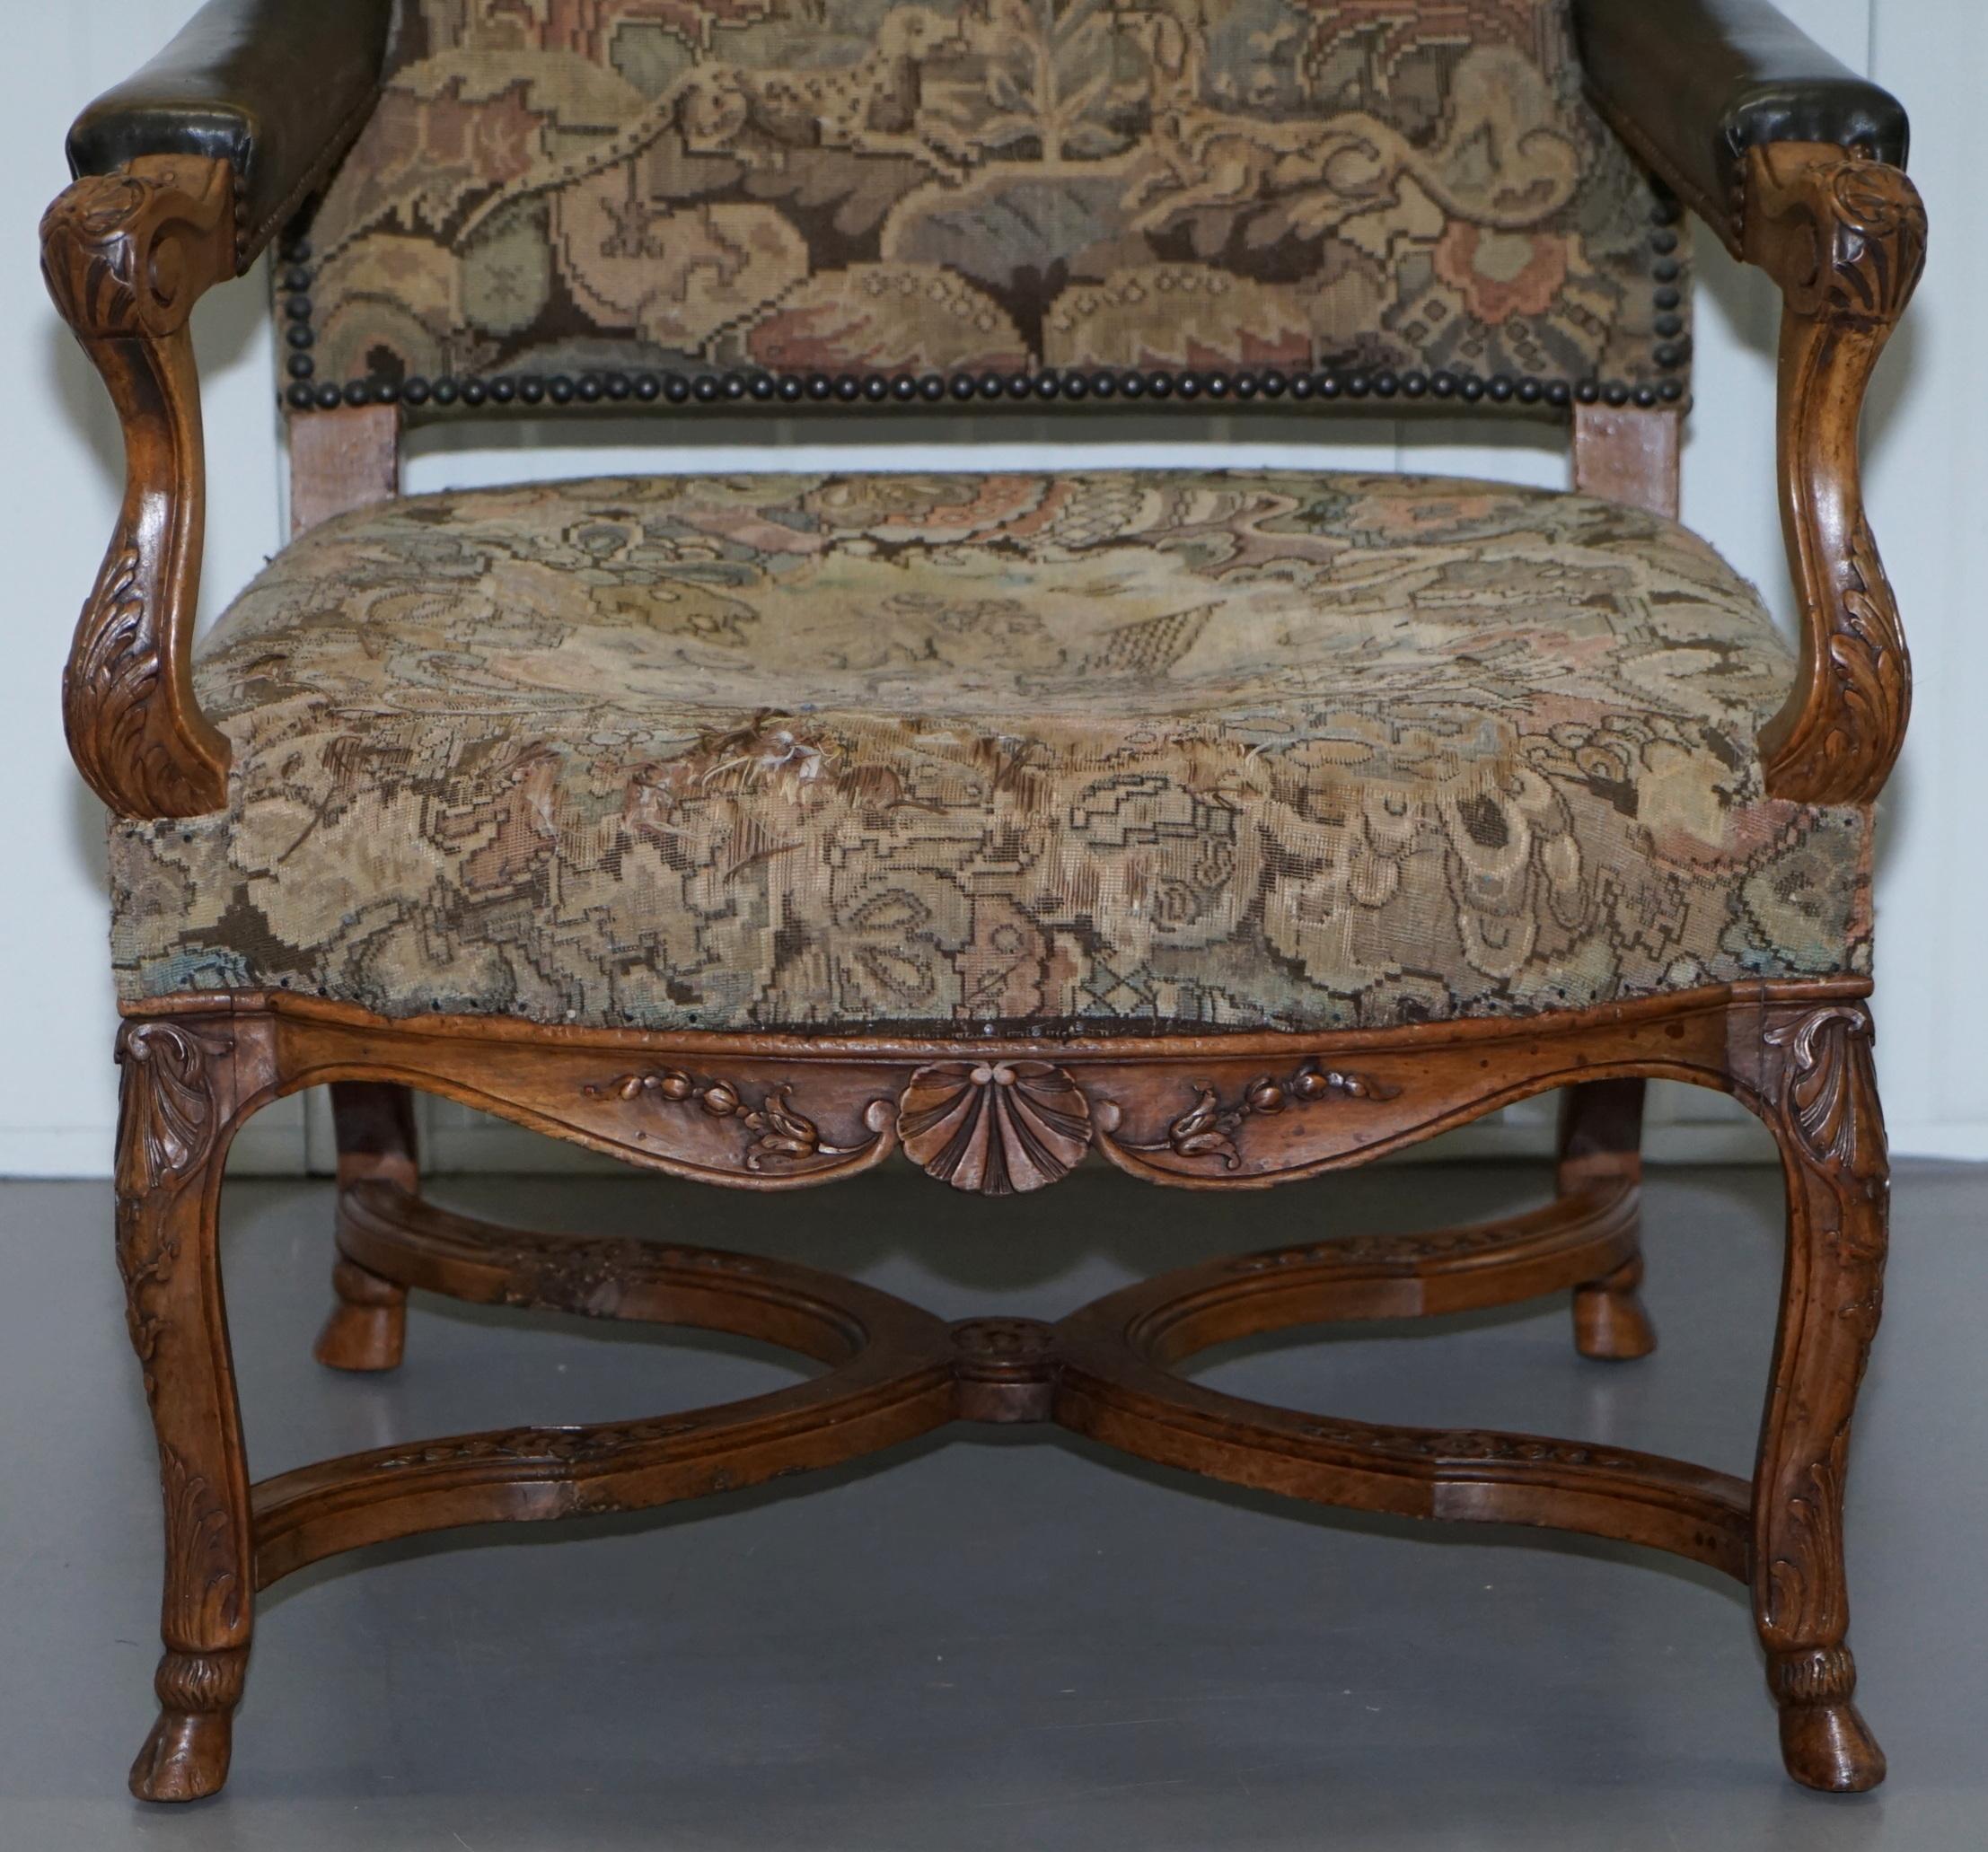 Rare 19th Century French Embroidered Armchair Ornately Carved Frame High Back For Sale 3